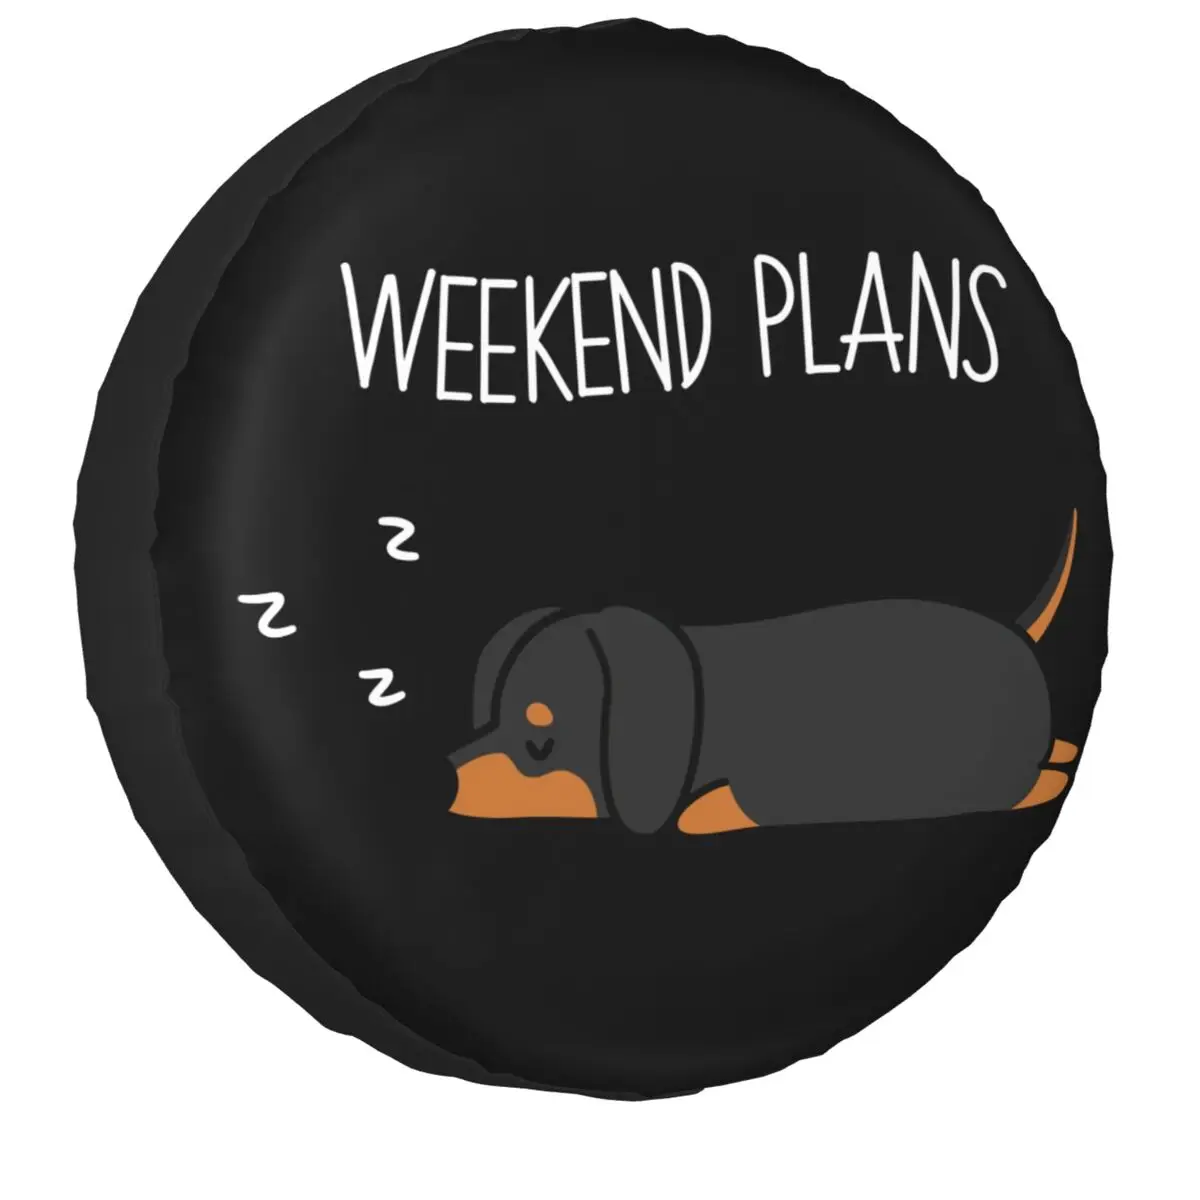 

Dachshund Weekend Plans Tire Cover 4WD 4x4 SUV Wiener Badger Sausage Dog Spare Wheel Protector for Honda 14" 15" 16" 17" Inch